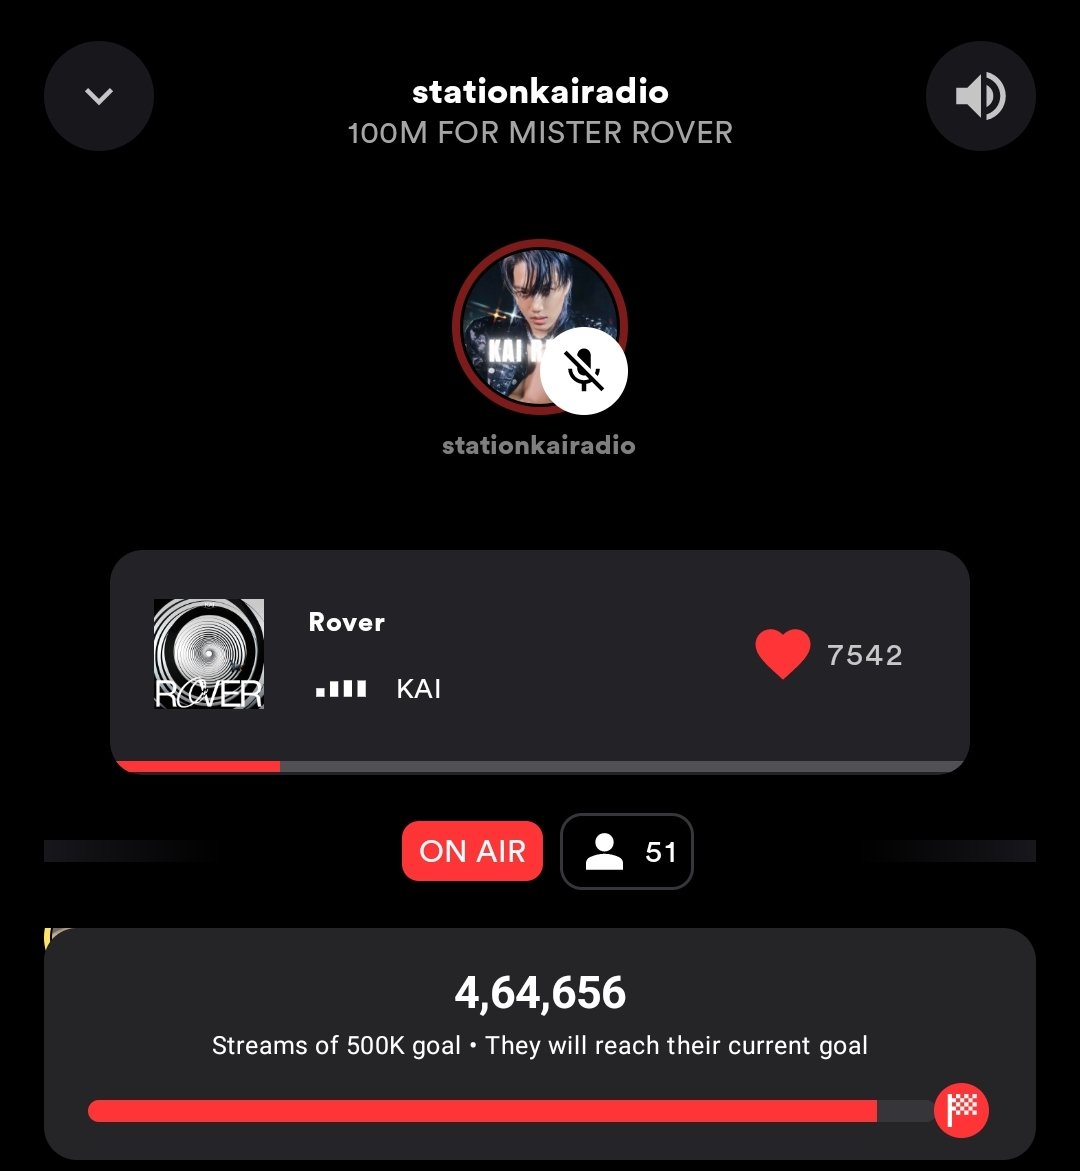 We reached 51 listeners already, please keep joining, can y'all help us in getting our daily goal of 150 listeners and maintain the daily streams for Rover 🔥 If yes, come park your accounts and chat with us, we're having so much fun here ✨🌀 🔗: stationhead.com/stationkairadio #KAI